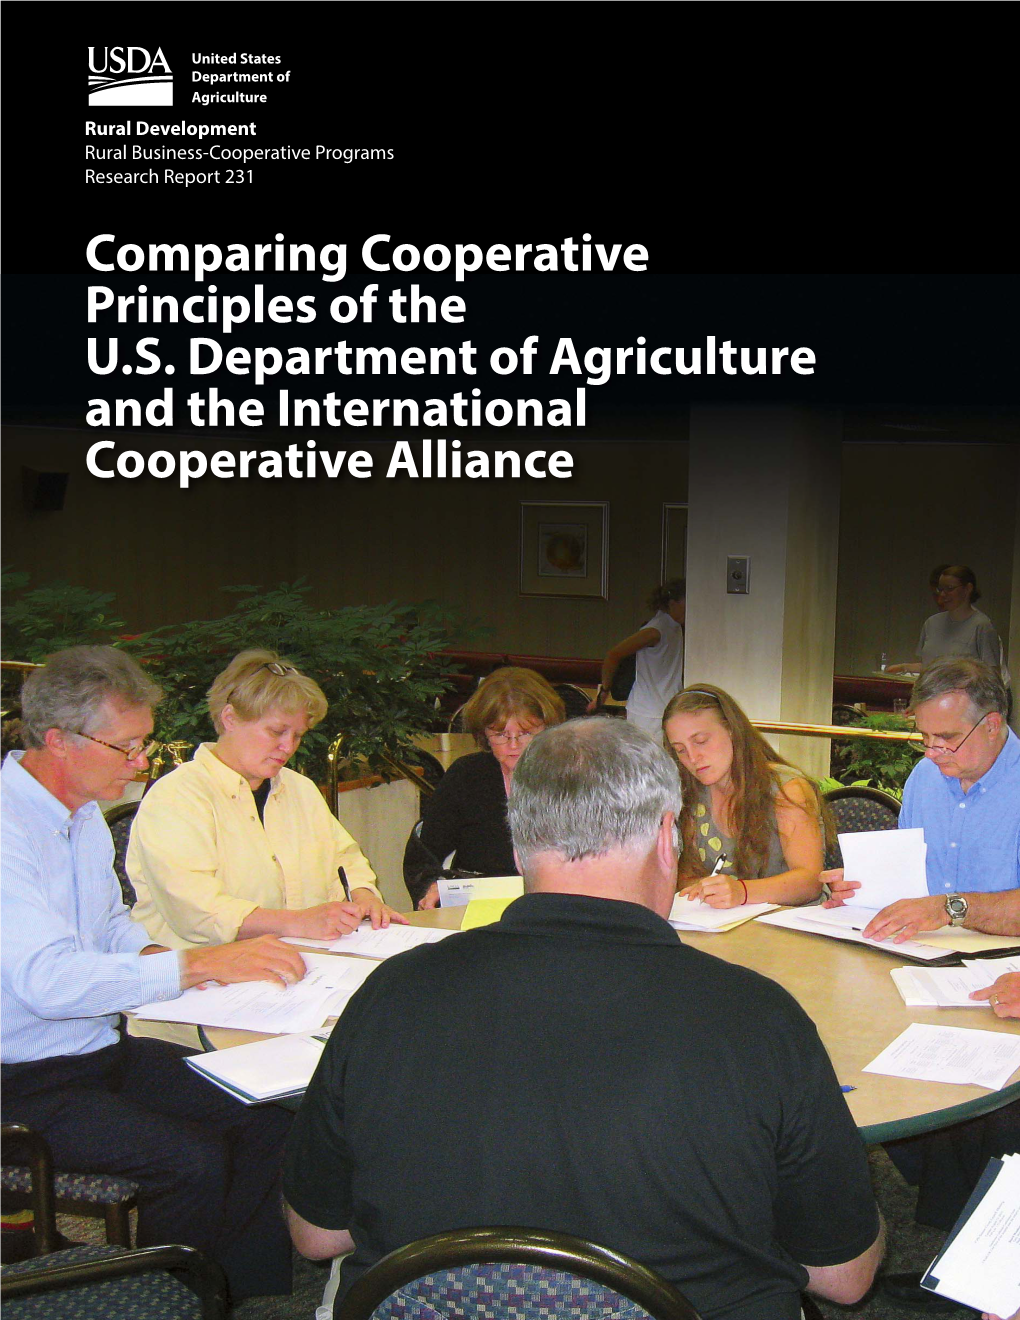 Comparing Cooperative Principles of the US Department of Agriculture